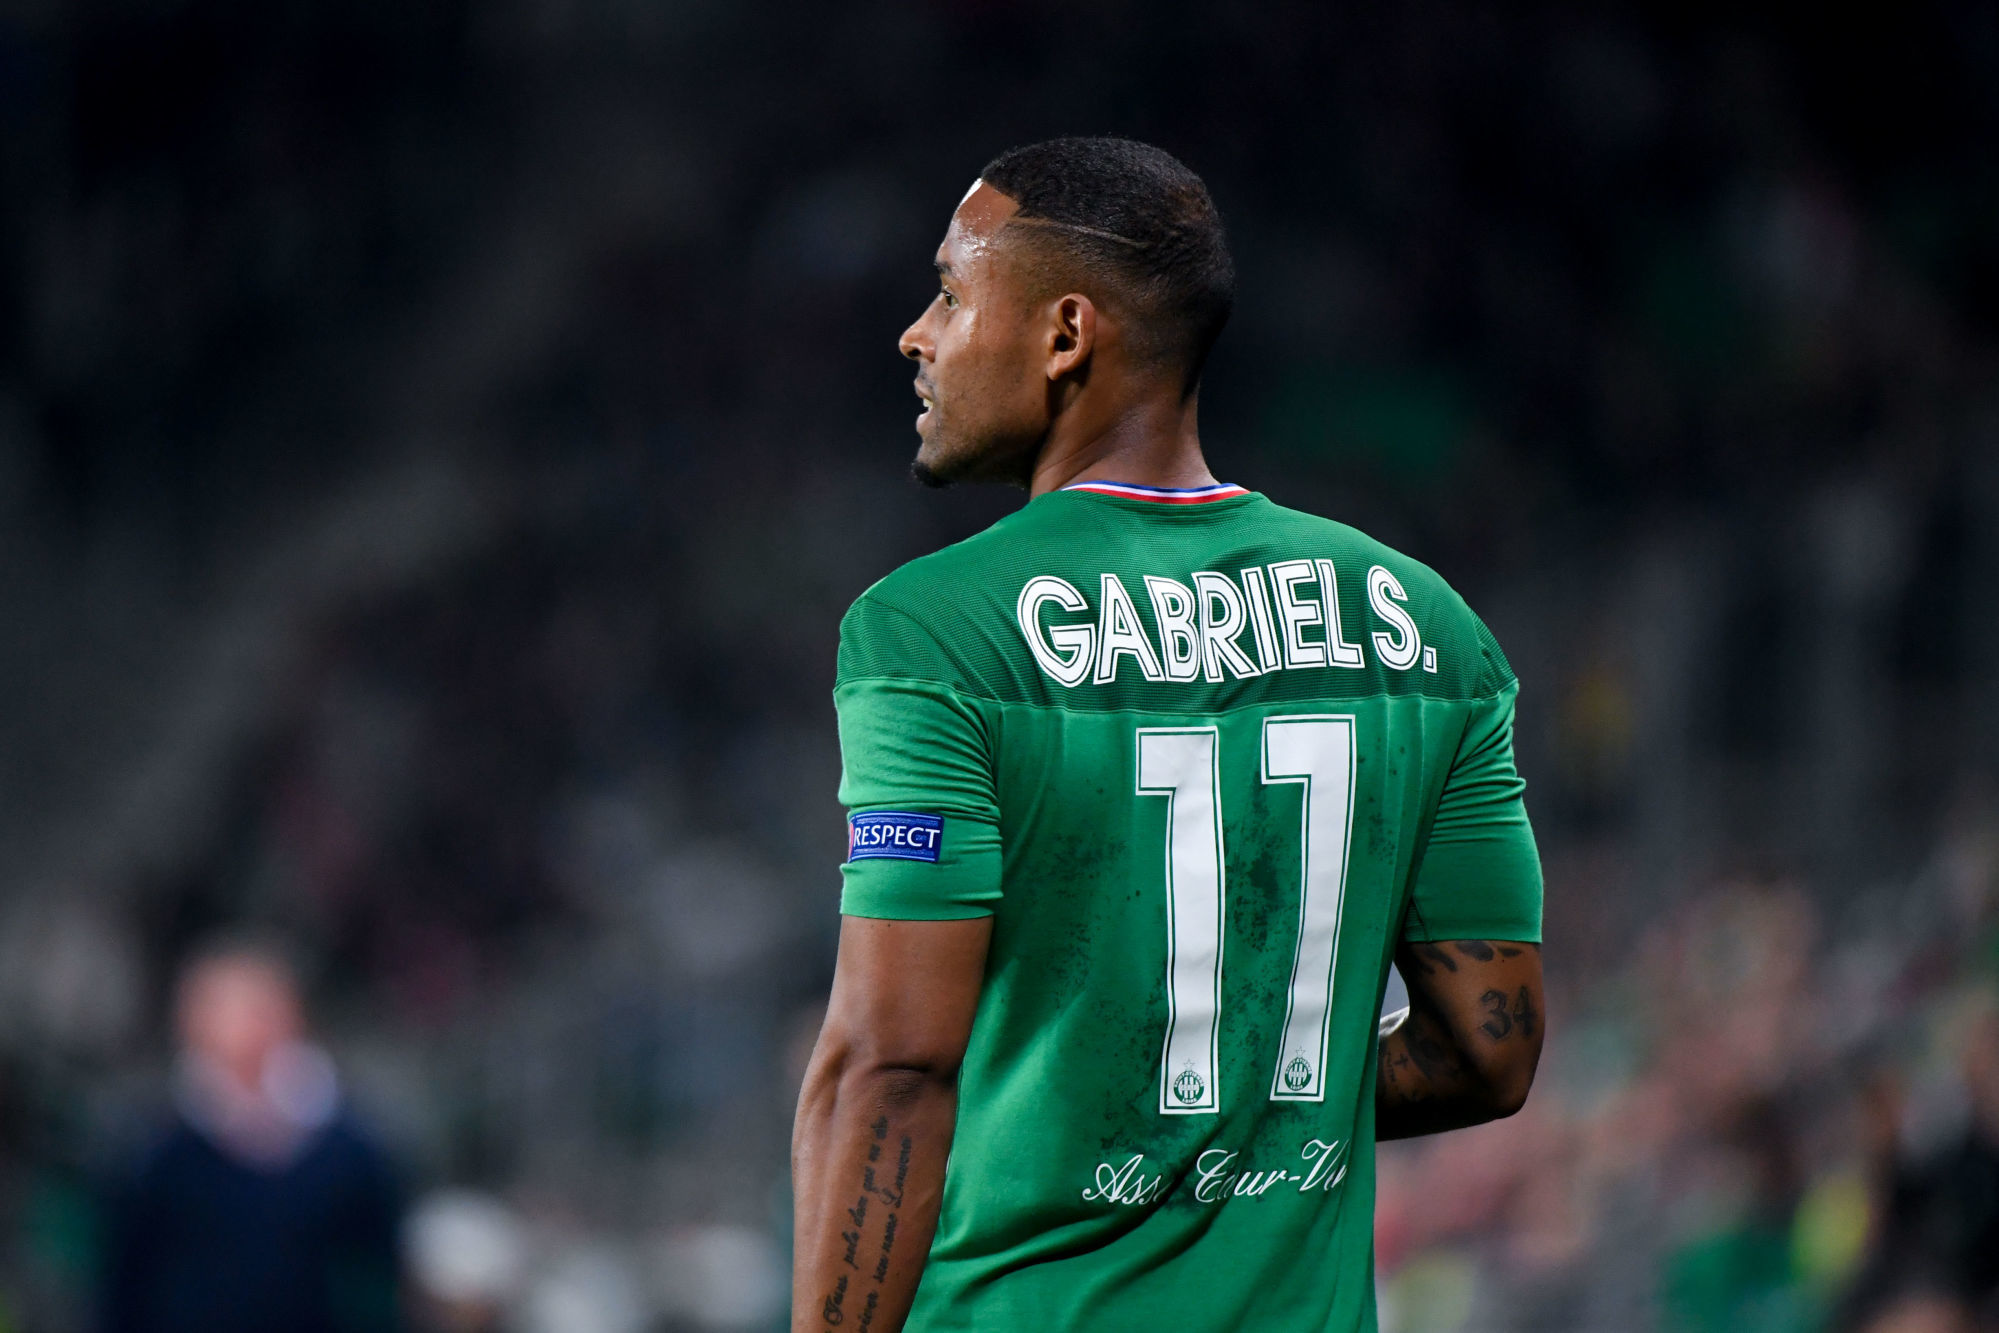 Gabriel SILVA of Saint Etienne during the UEFA Europa League, Group I match between Saint Etienne and Oleksandria on October 24, 2019 in Saint-Etienne, France. (Photo by Anthony Dibon/Icon Sport) - Gabriel SILVA - Stade Geoffroy-Guichard - Saint Etienne (France)